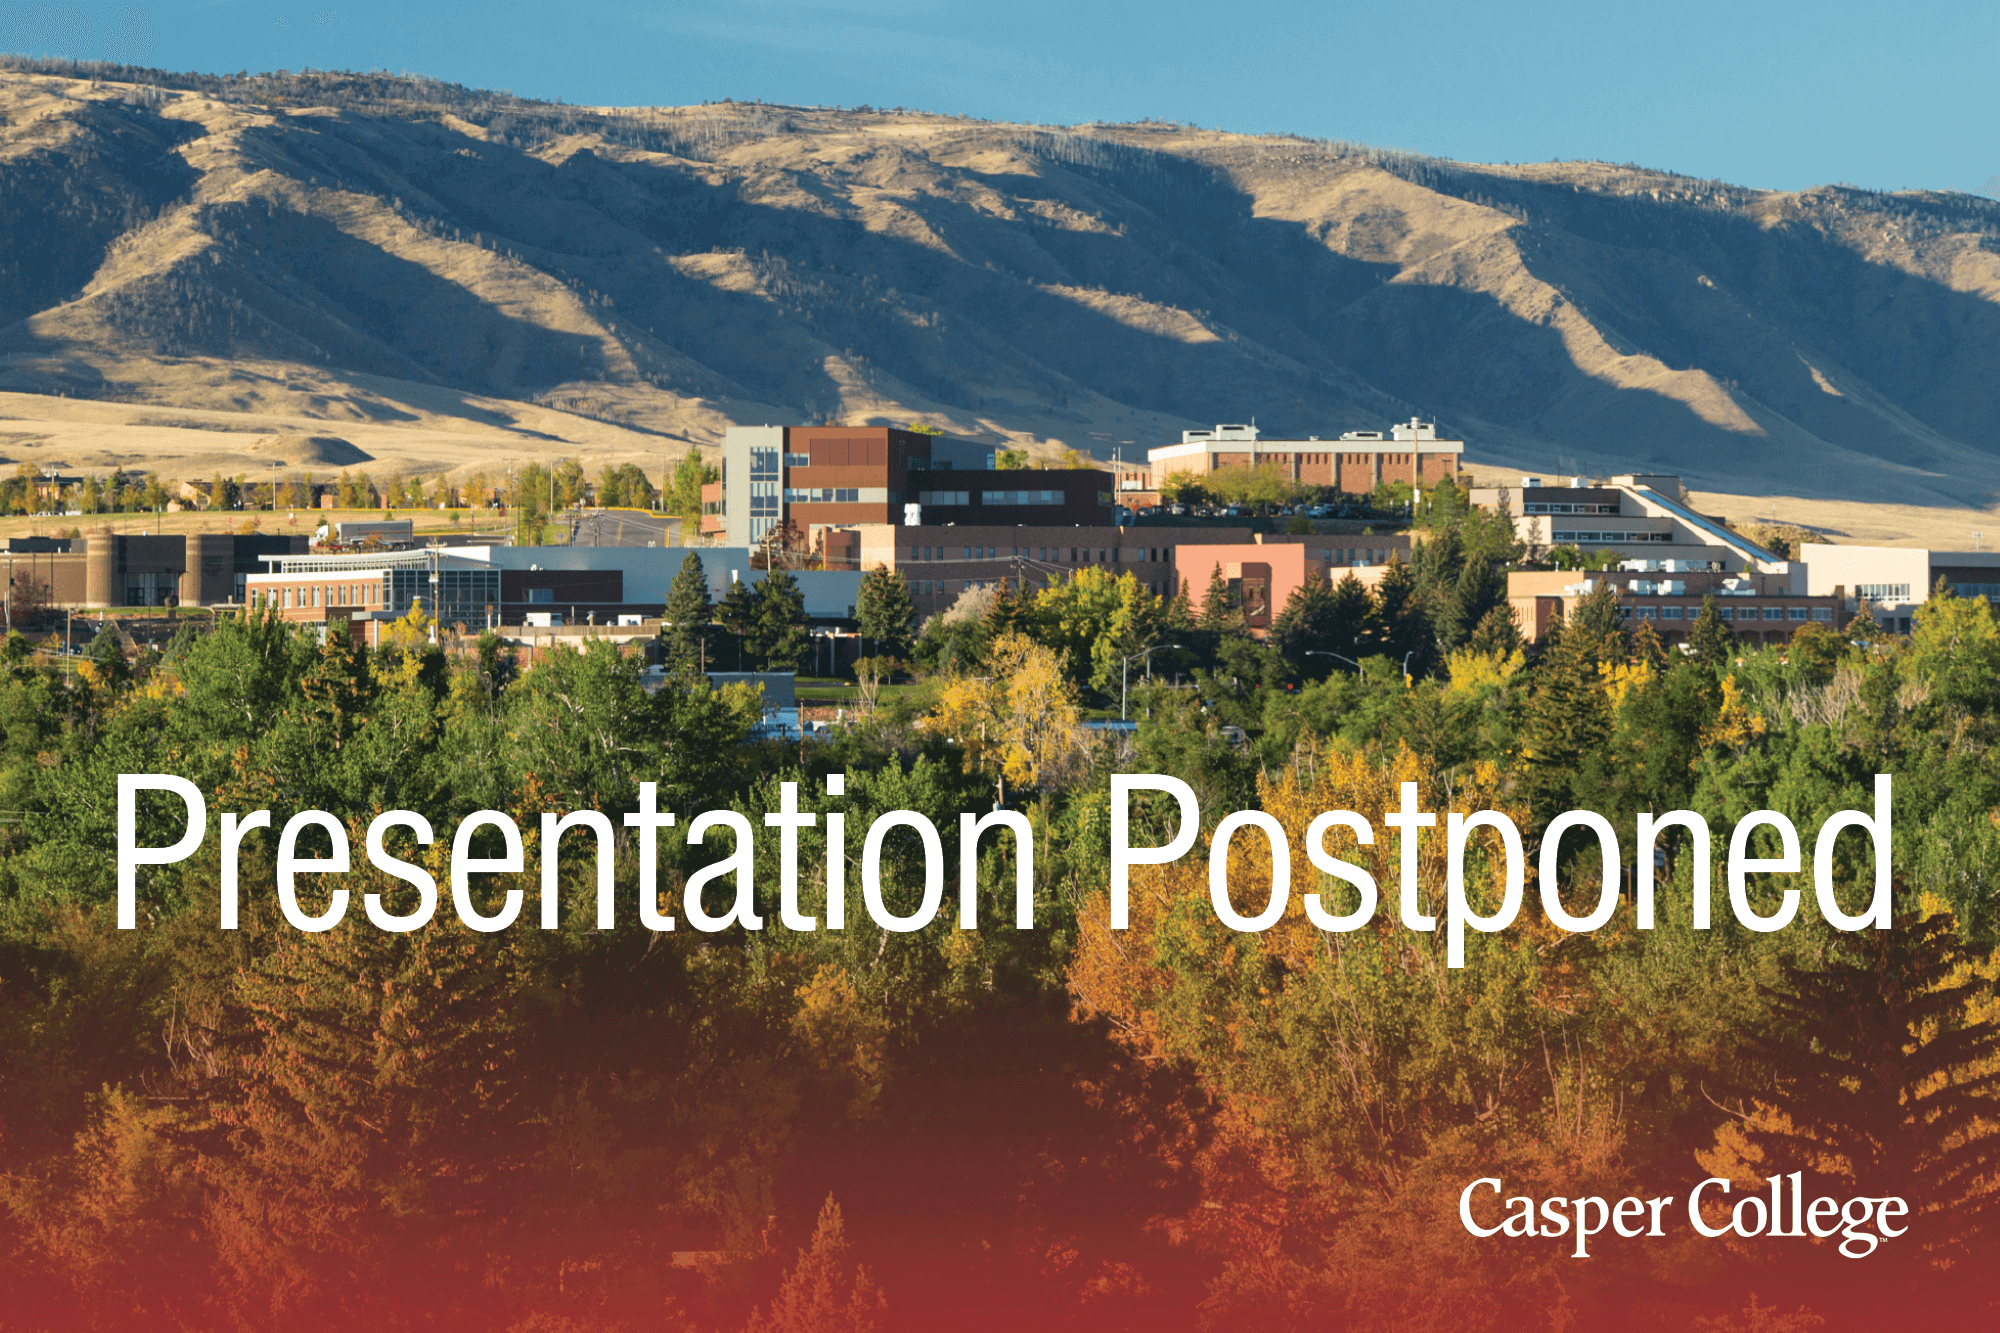 Image of Casper College campus with the words "Presentation Postponed."